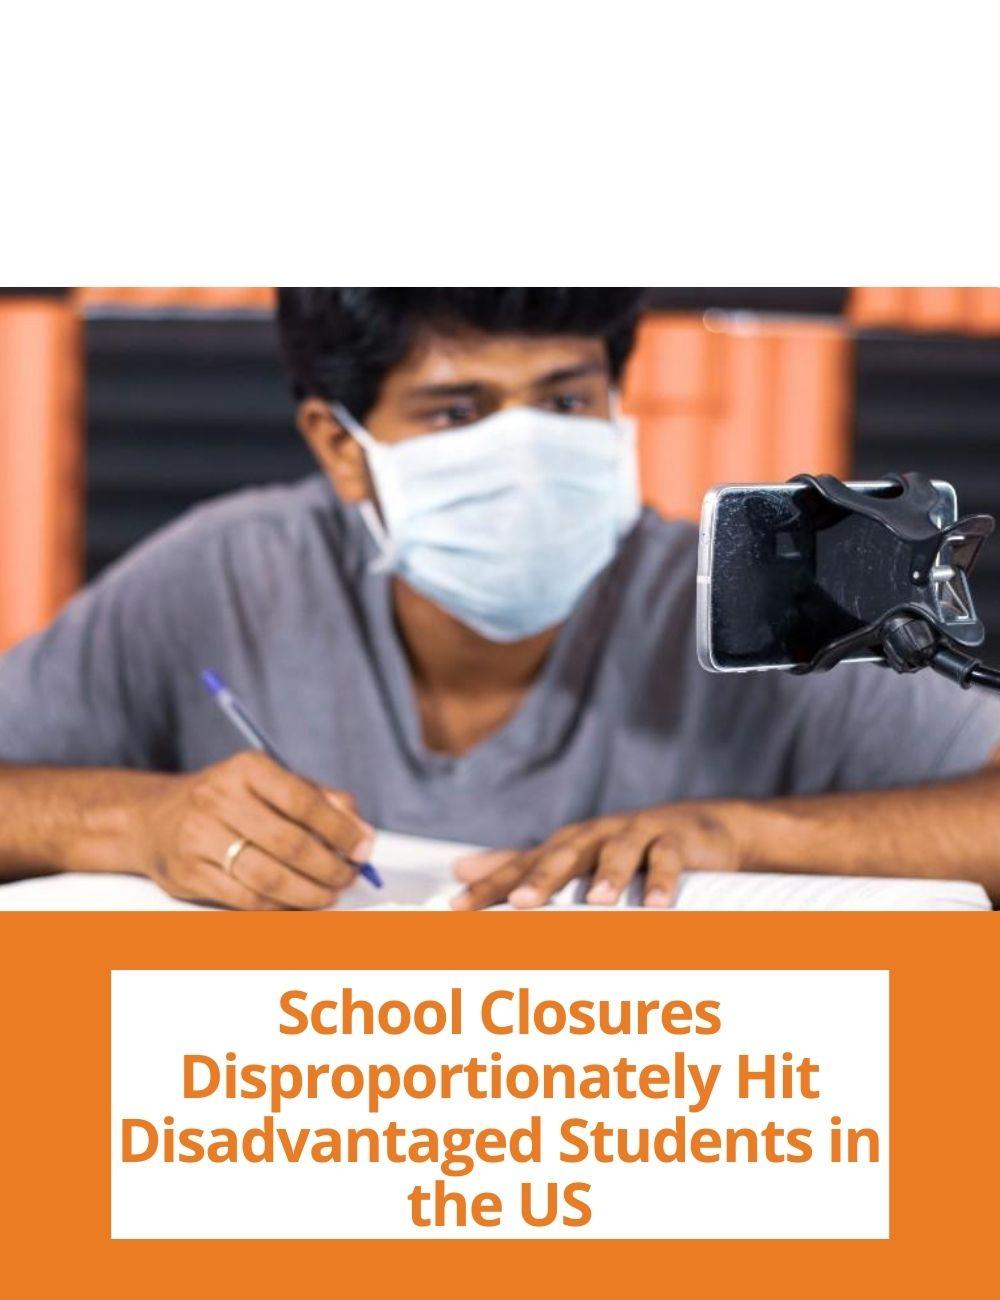 Image: a student wearing a surgical mask. Link to related stories. Story headline: School Closures Disproportionately Hit Disadvantaged Students in the US